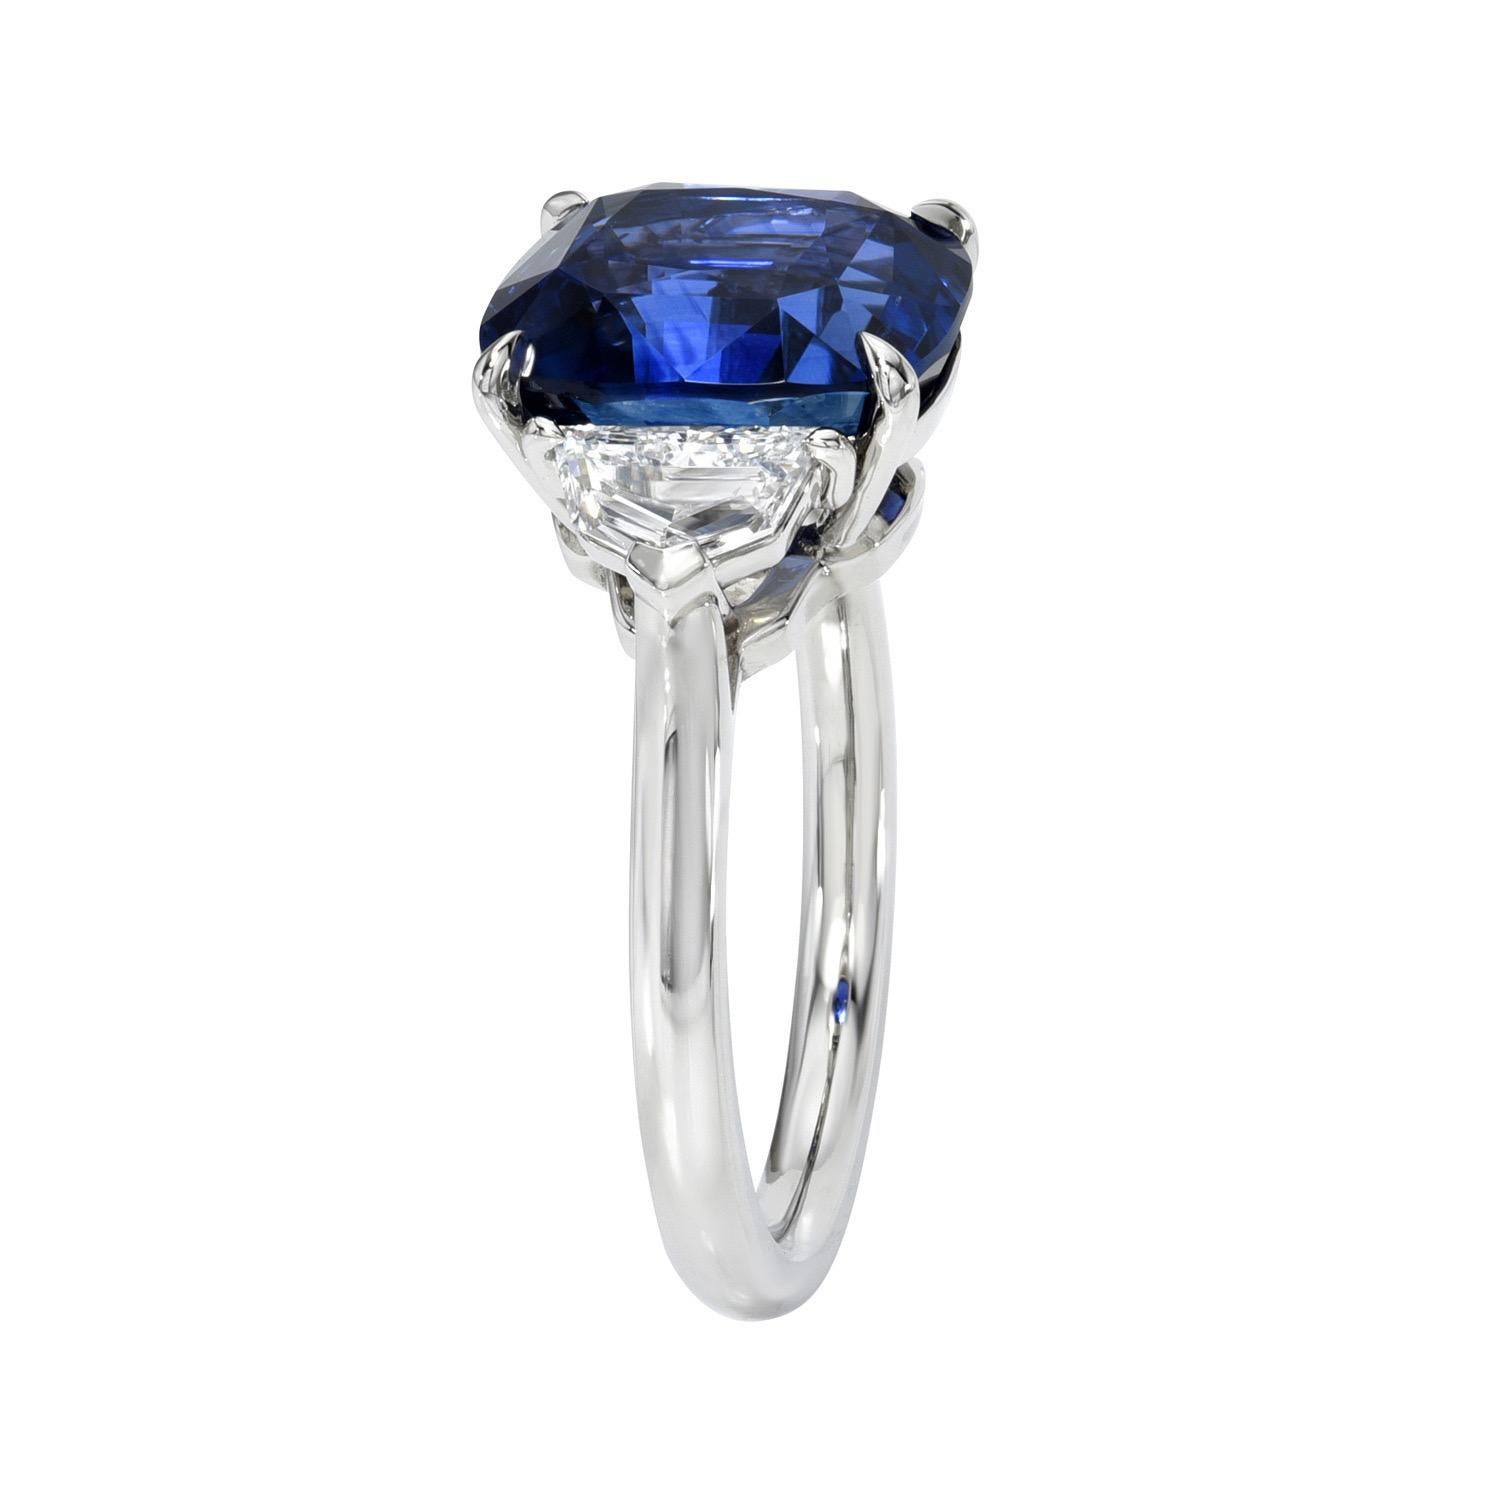 Women's Sapphire Ring 6.05 Carat Cushion For Sale